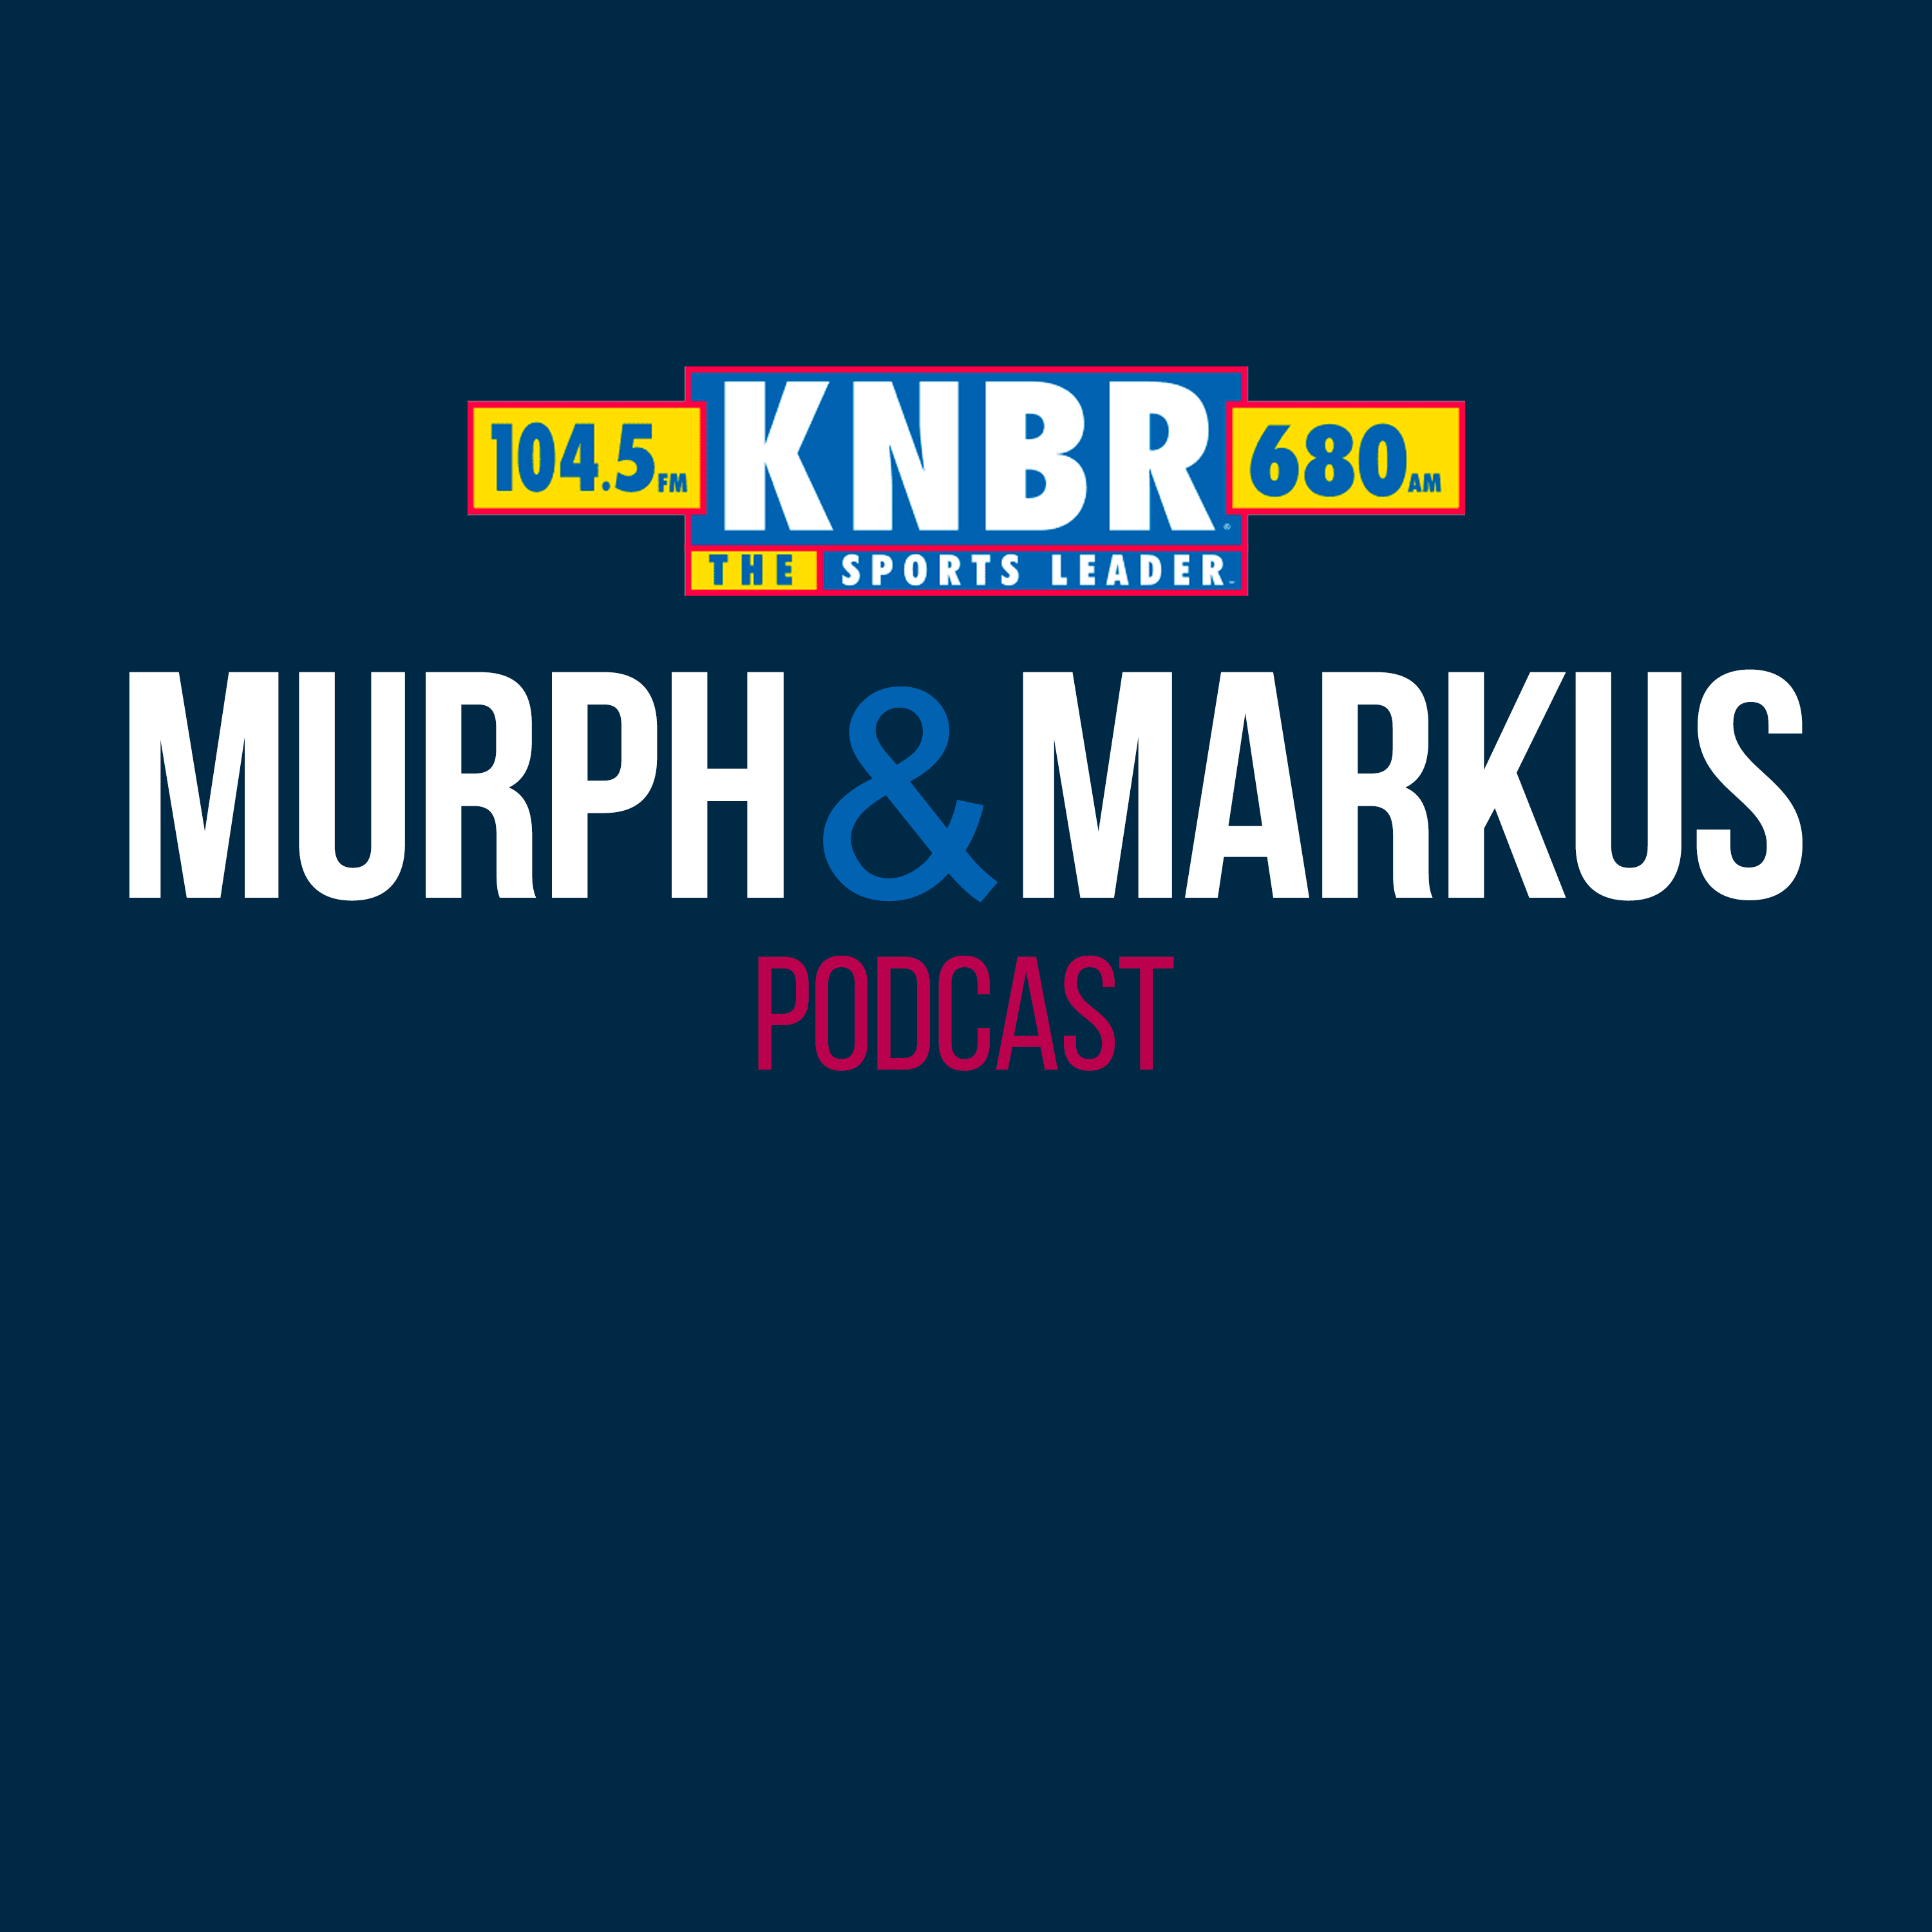 7-5 Hour 1: Murph & Markus react to the Warriors signing Buddy Hield, share their thoughts on the Giants winning their 3rd series in a row, and debate how the Warriors can make their roster even better